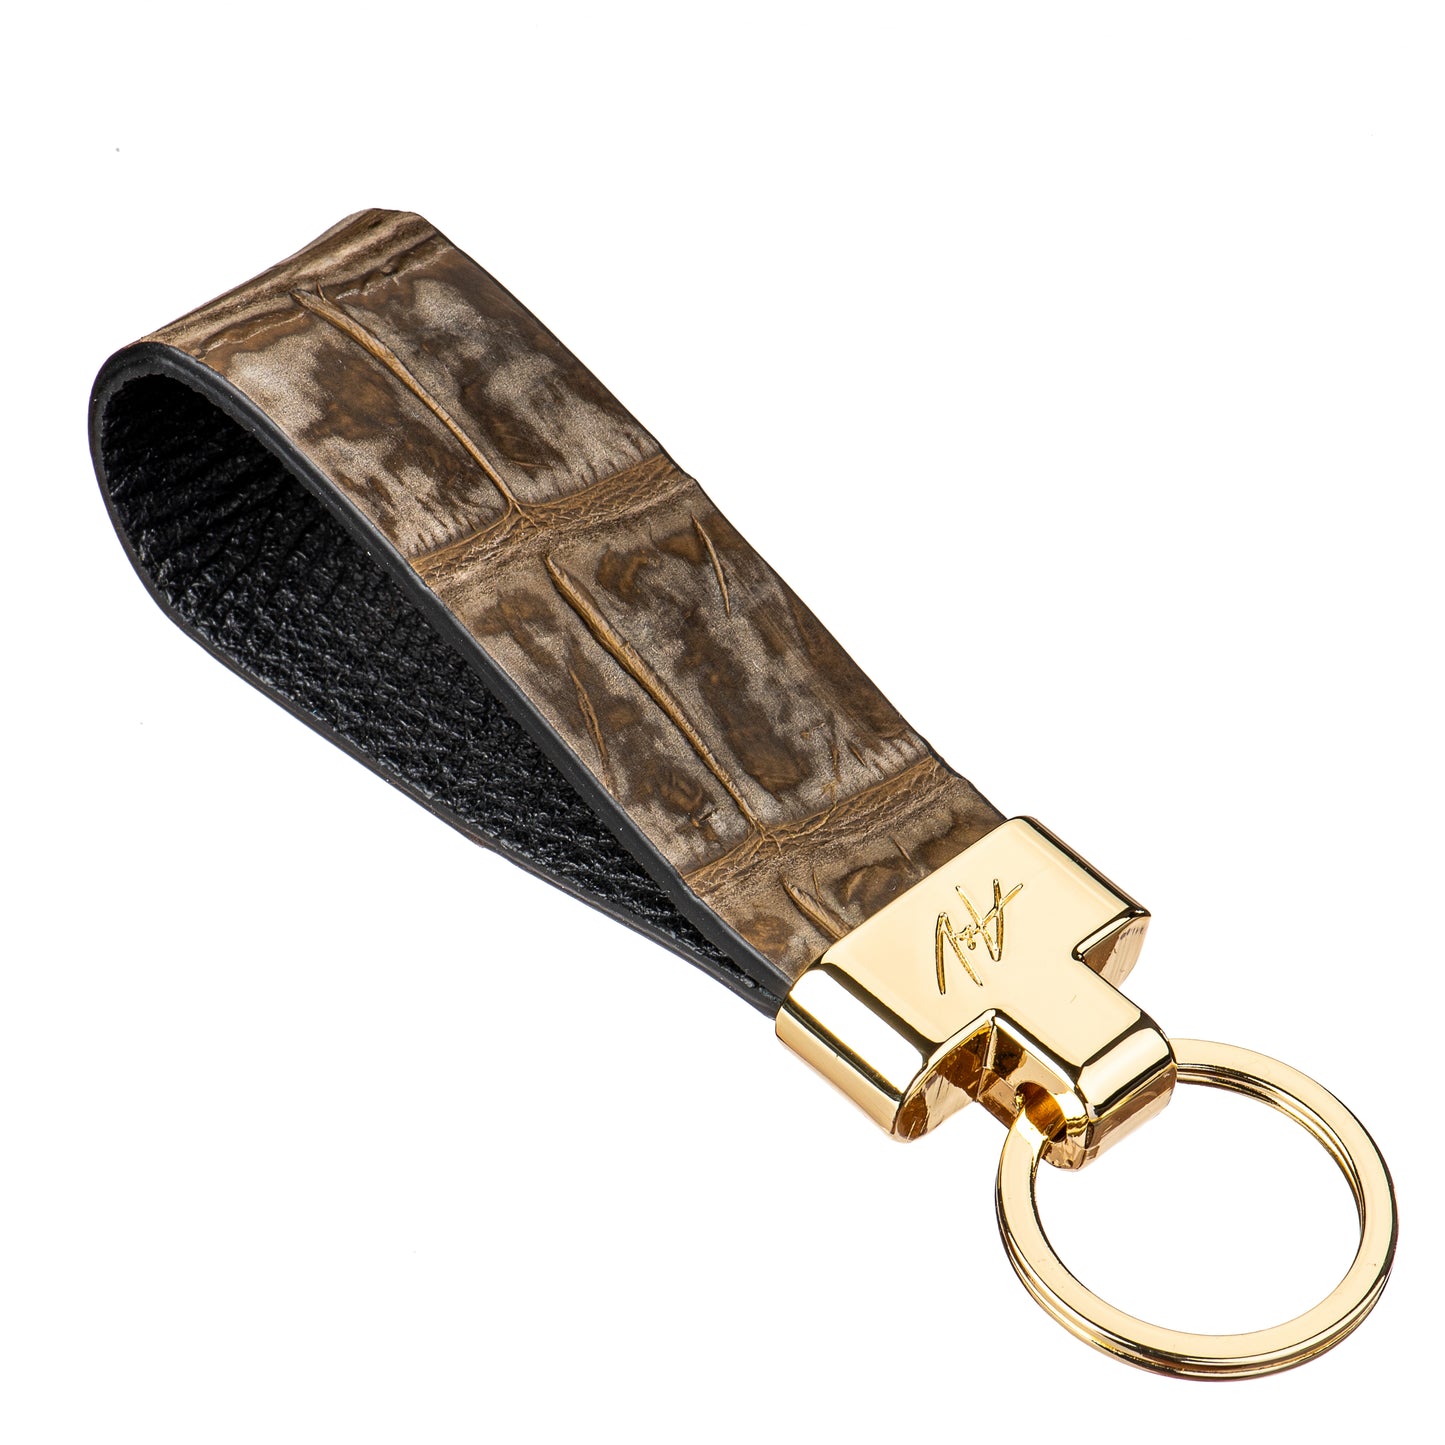 KEYCHAIN ROUNDED MUD GREEN